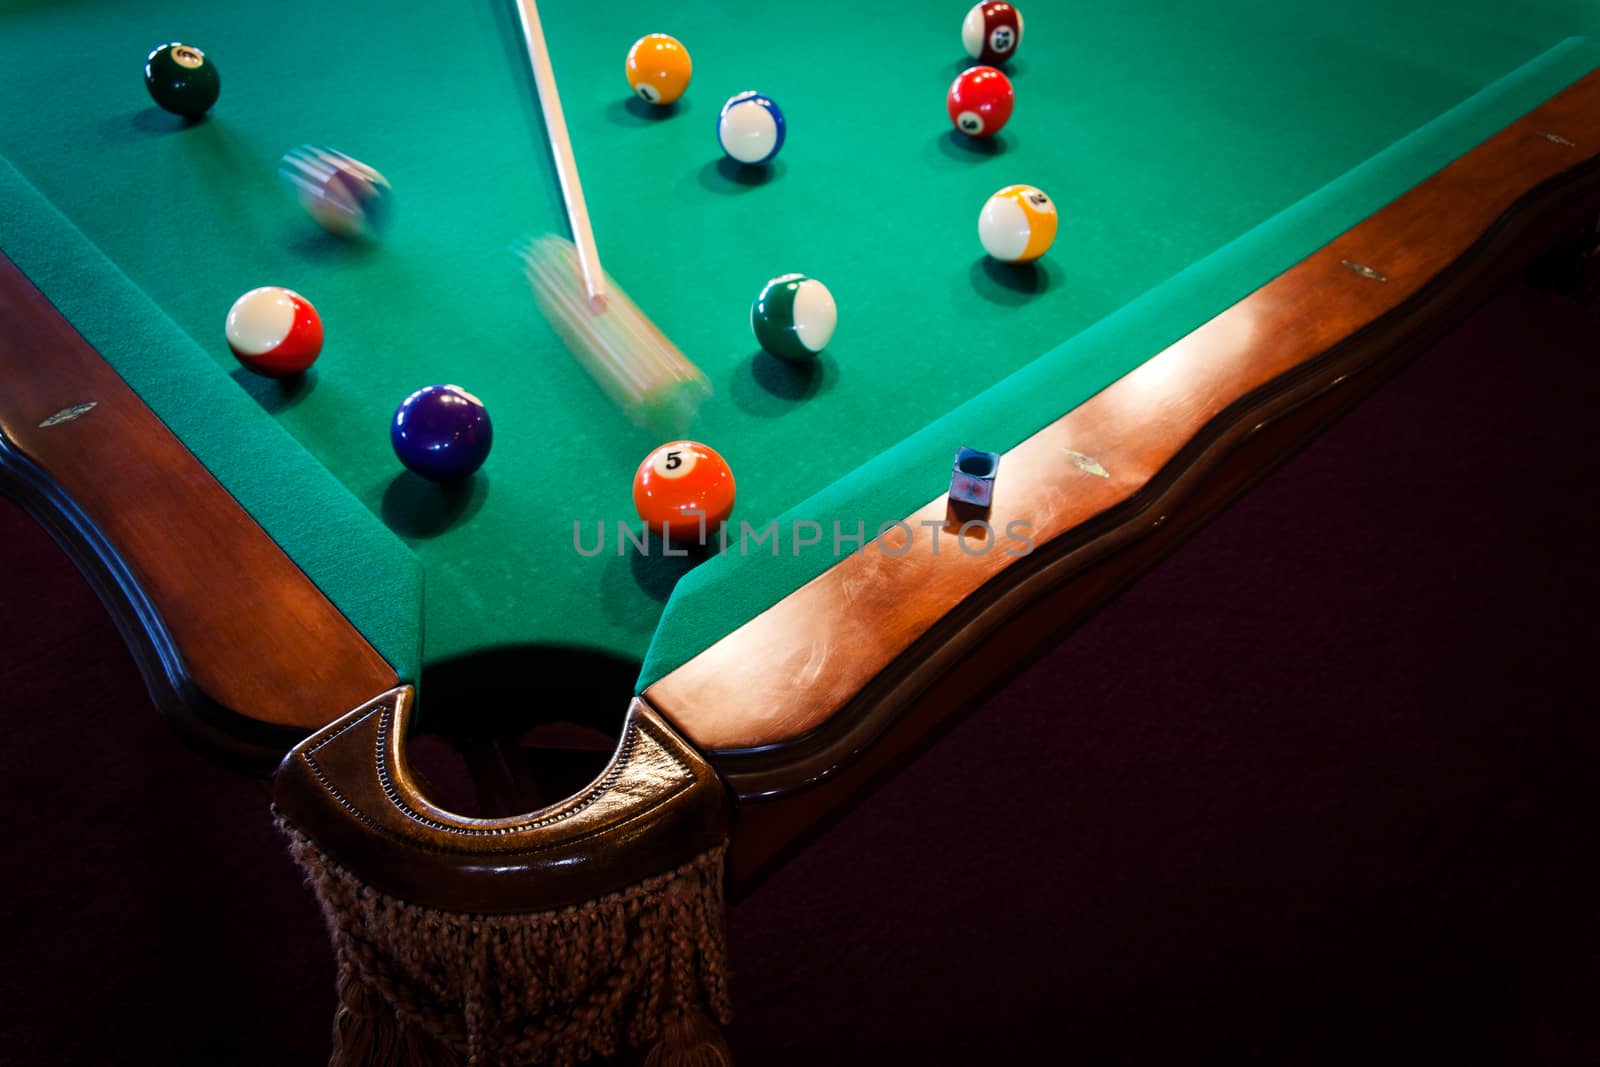 the pool table by terex